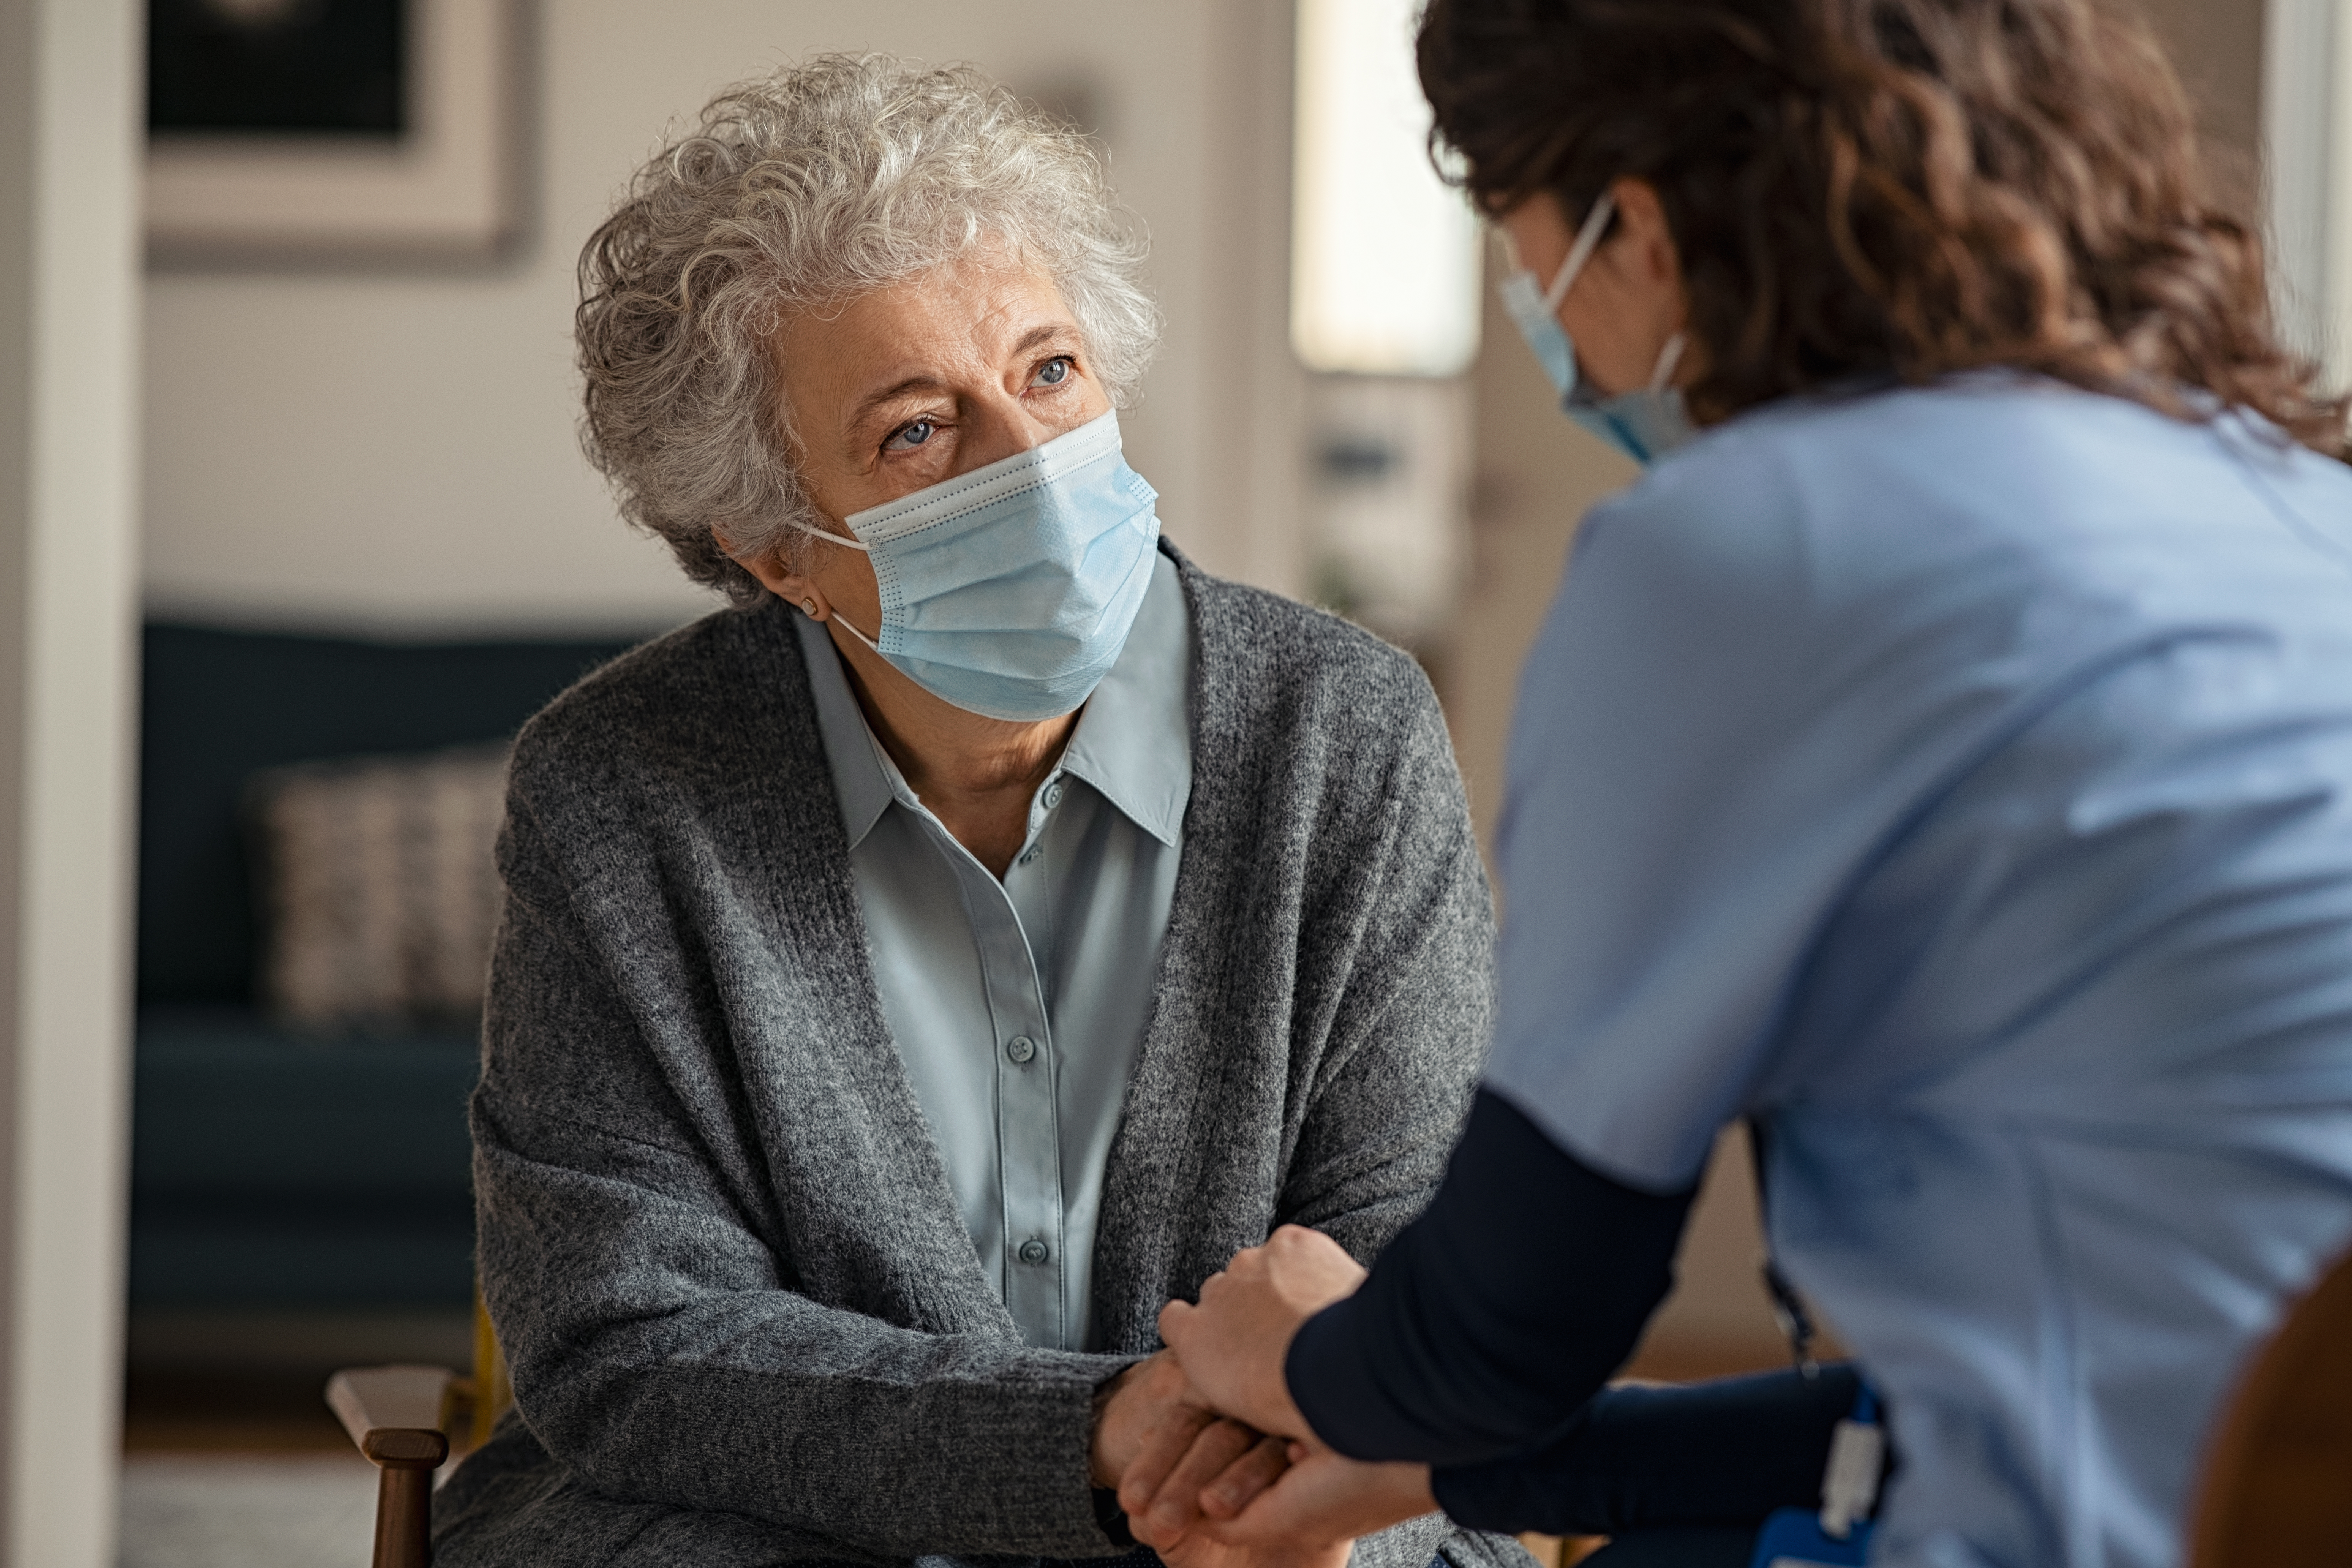 Female doctor consoling senior woman wearing face mask during home visit 1284869020 6192x4128 1